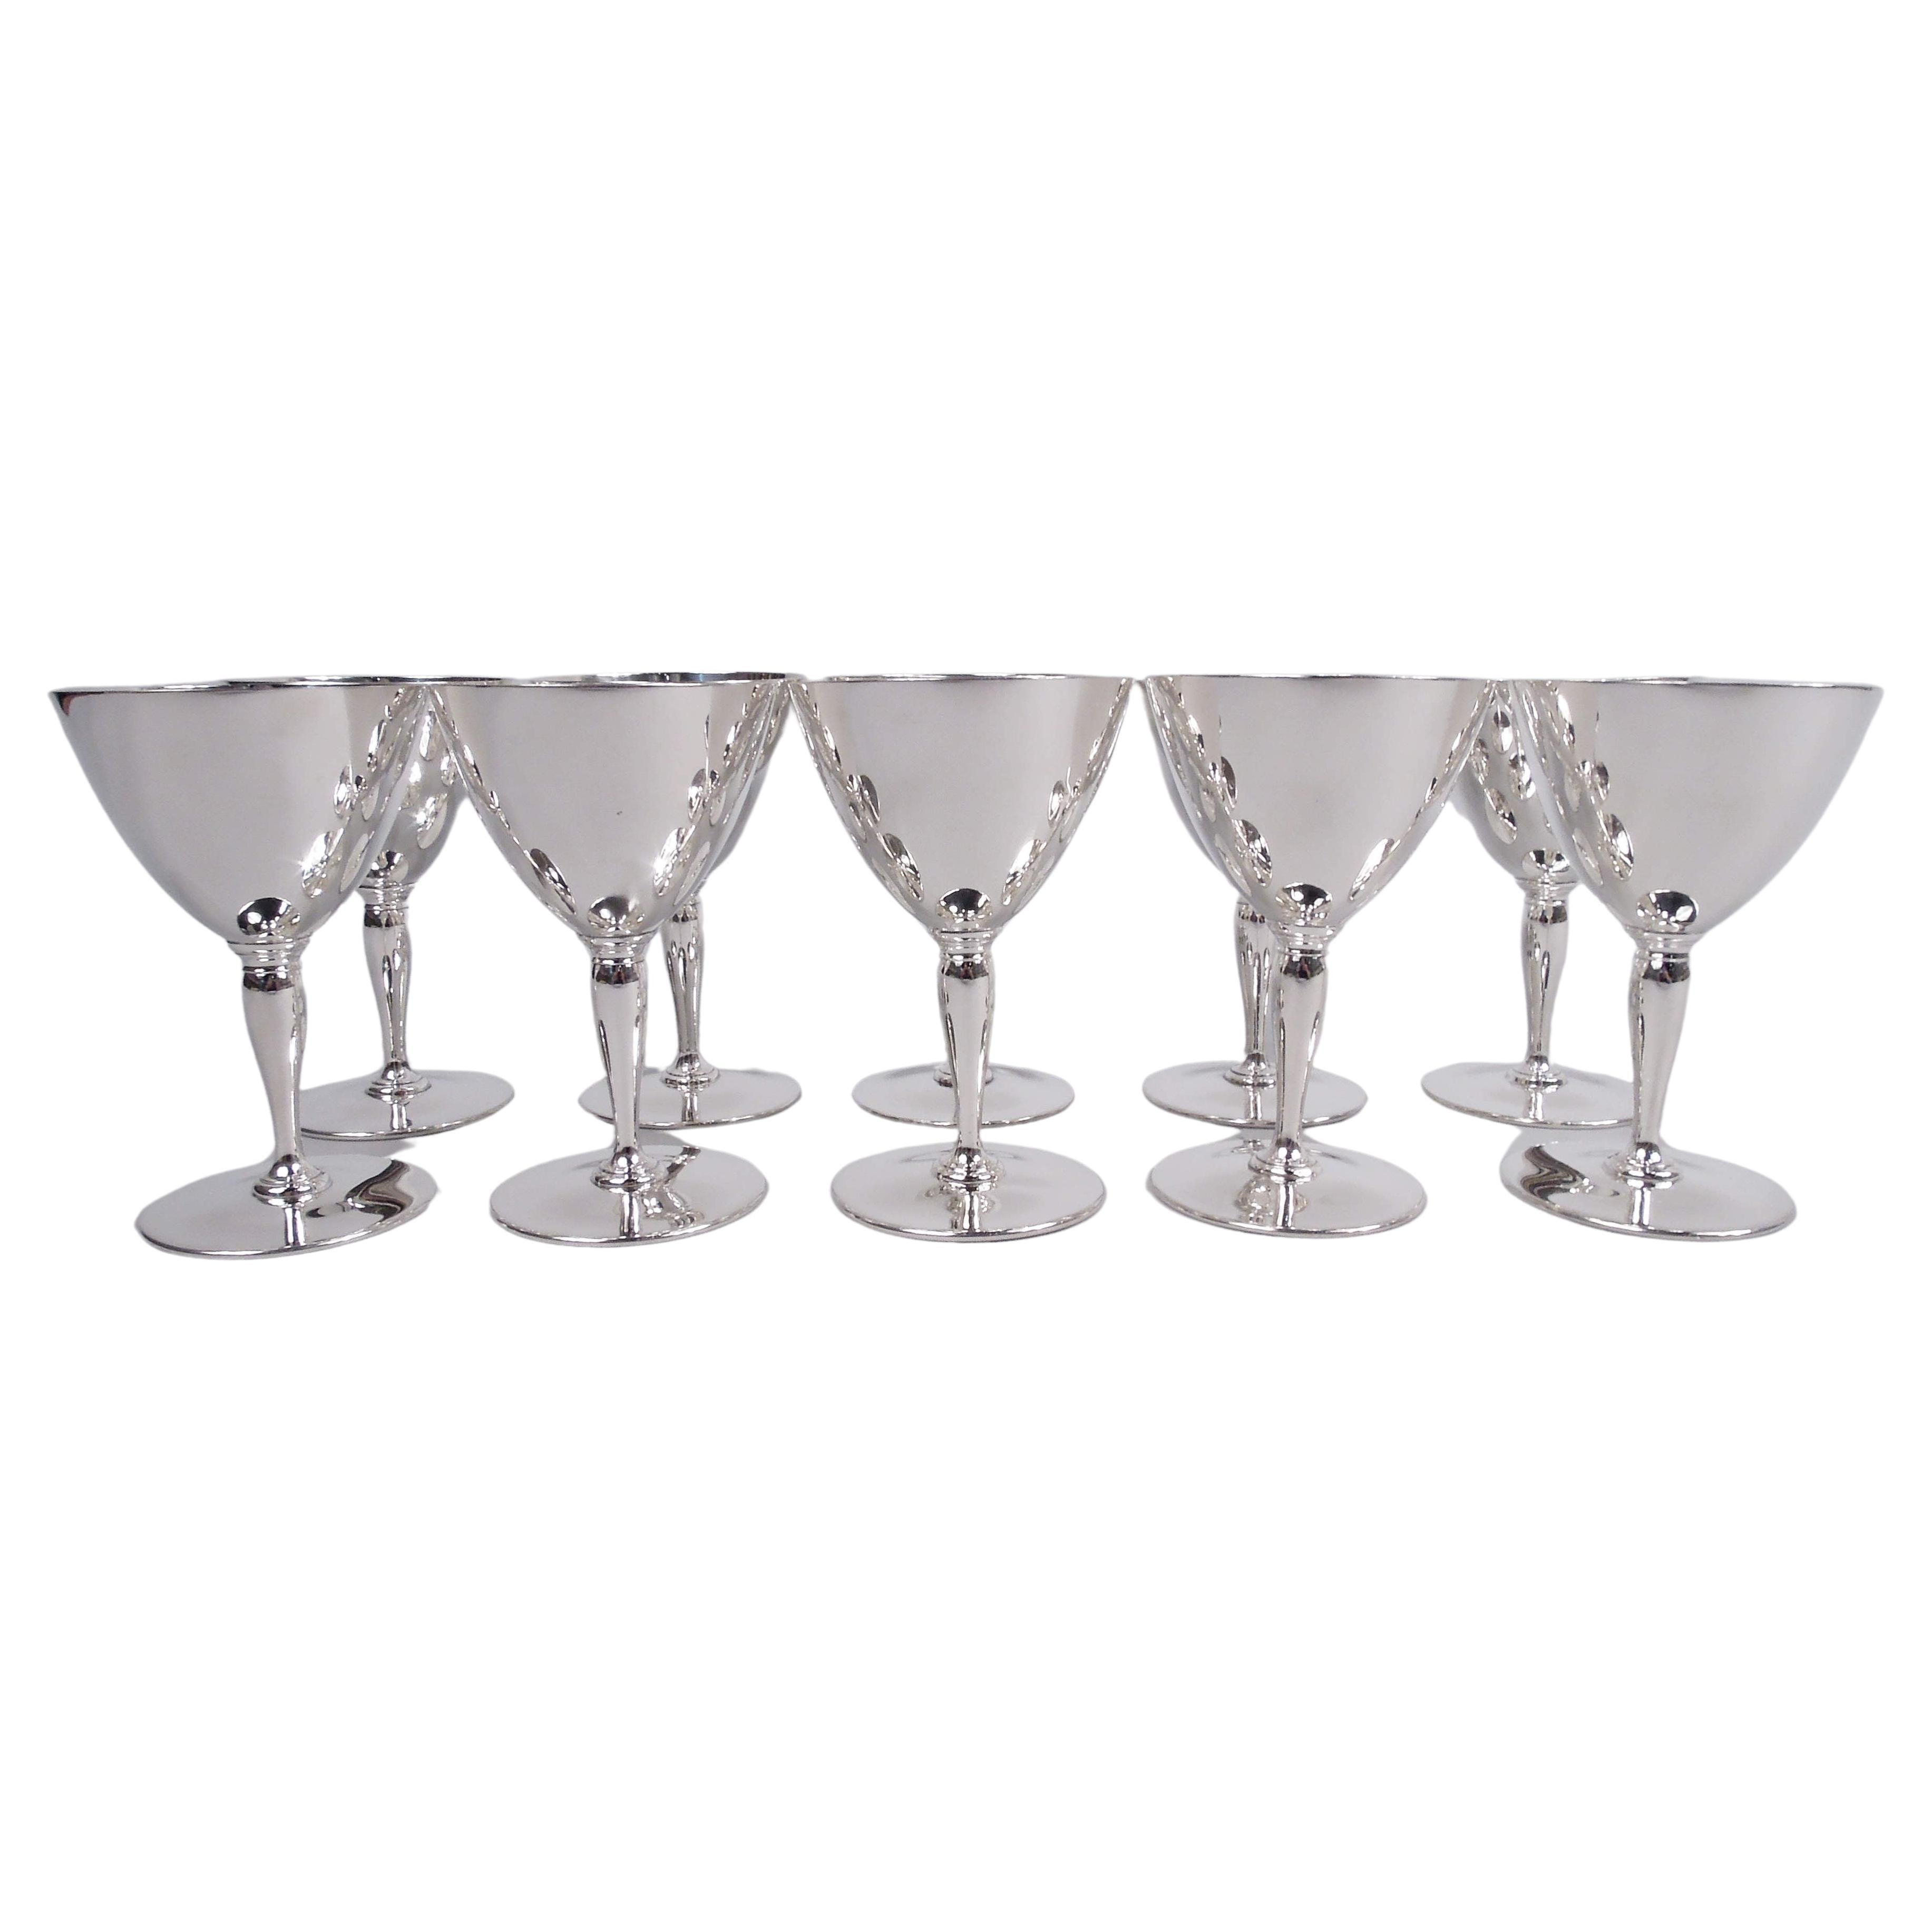 Set of 10 Tiffany American Art Deco Sterling Silver Cocktail Cups